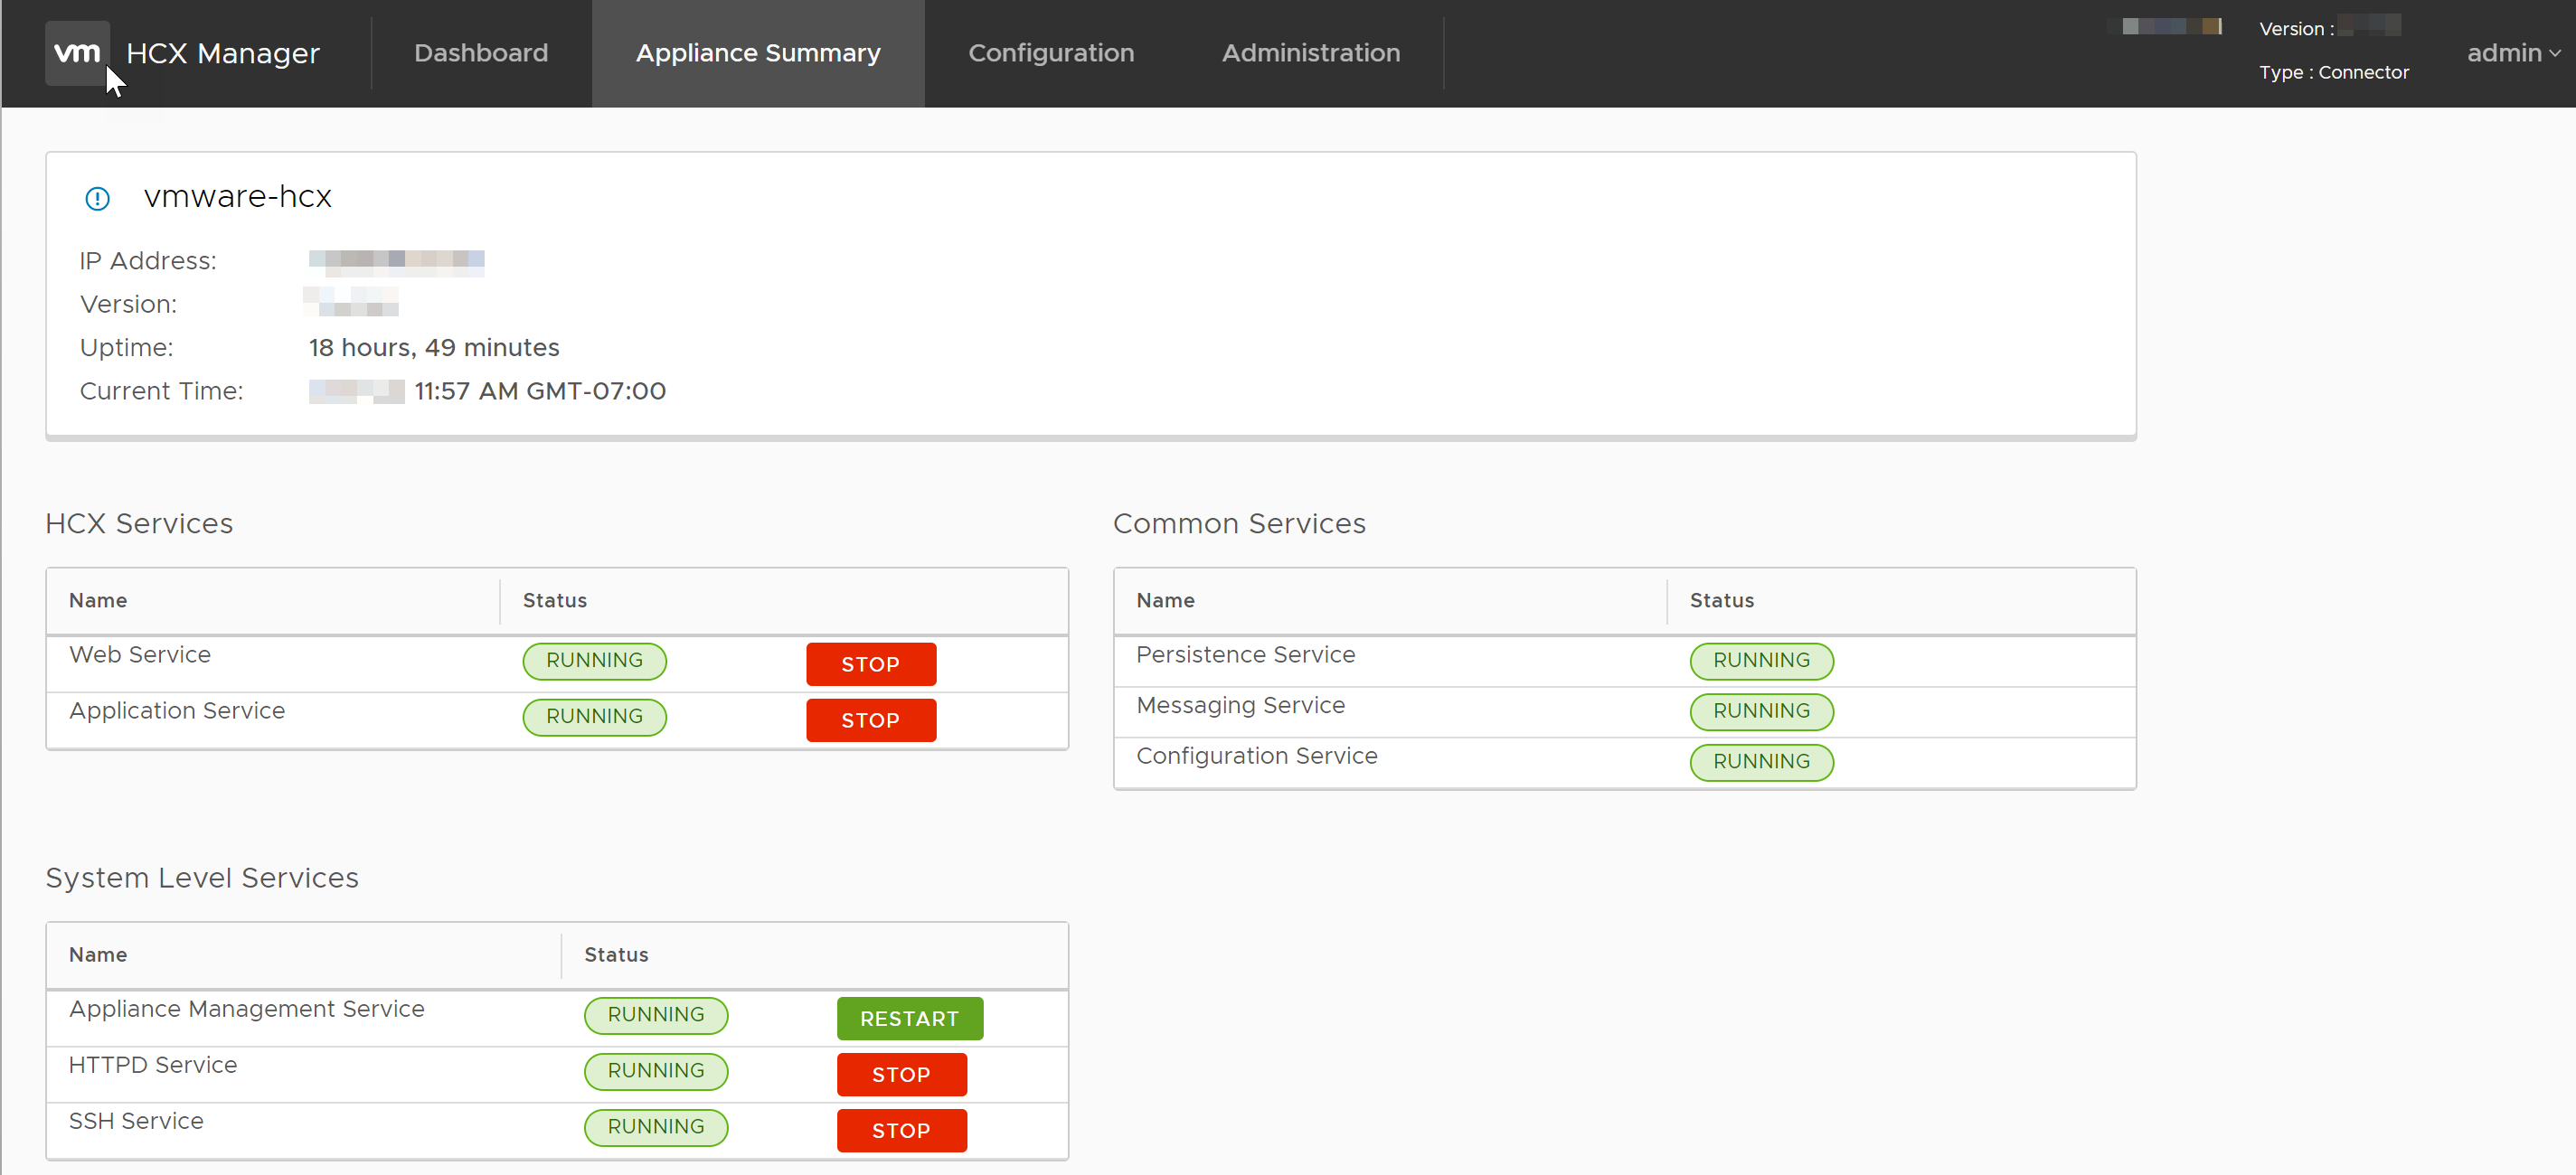 HCX Manager Appliance Summary: HCX Services (Web and Application), System Level Services (Appliance Management, HTTPD, and SSH), and service status.